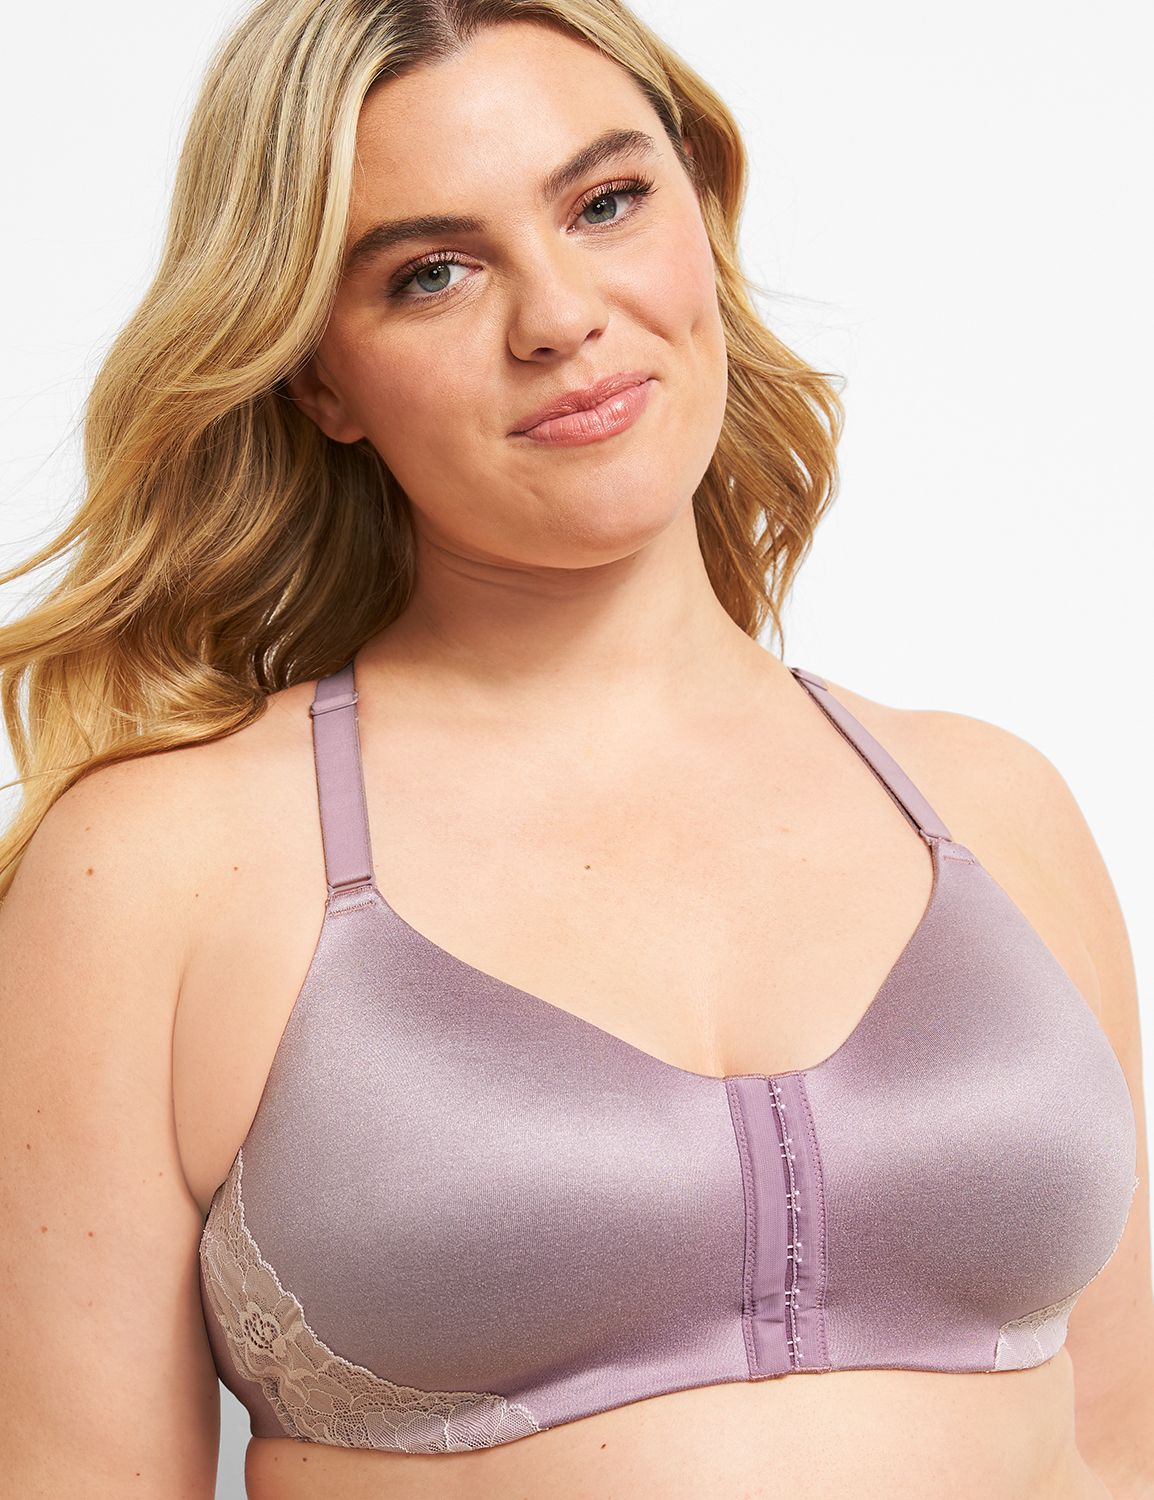 Mastectomy Bras 38F, Bras for Large Breasts